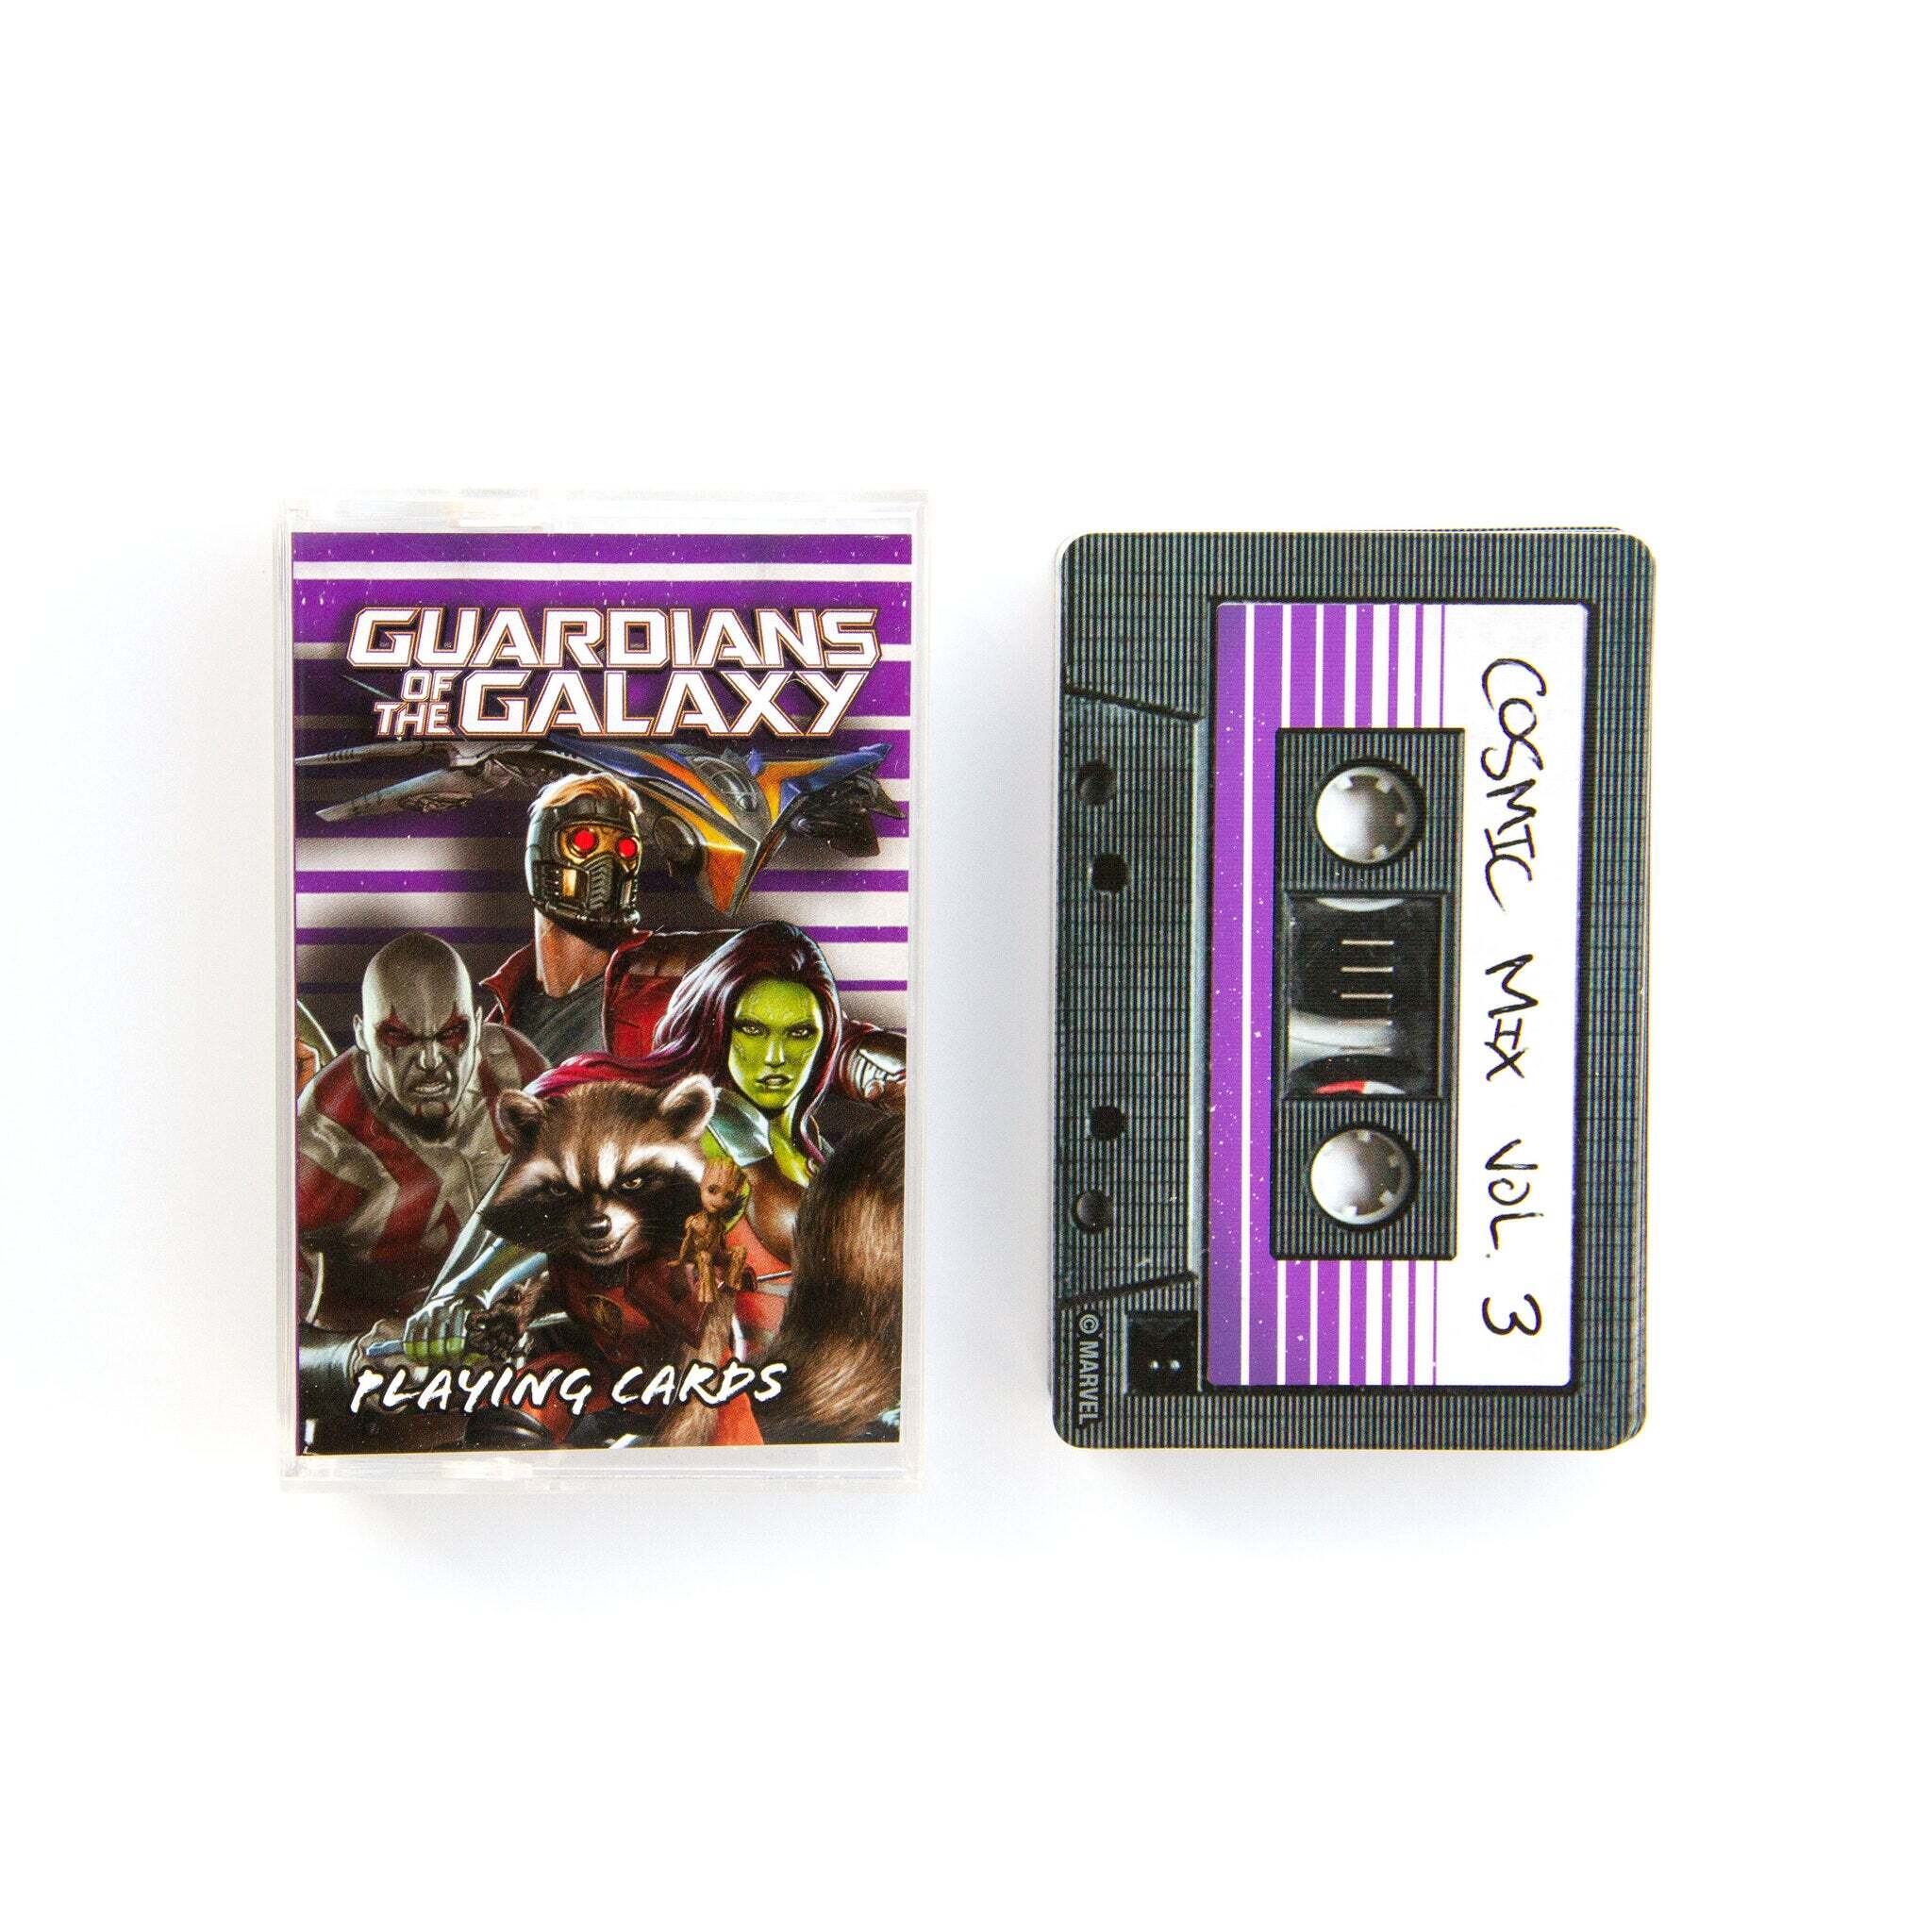 Guardians of the Galaxy Cosmic Mix Vol. 3 Cassette Tape Case Playing C